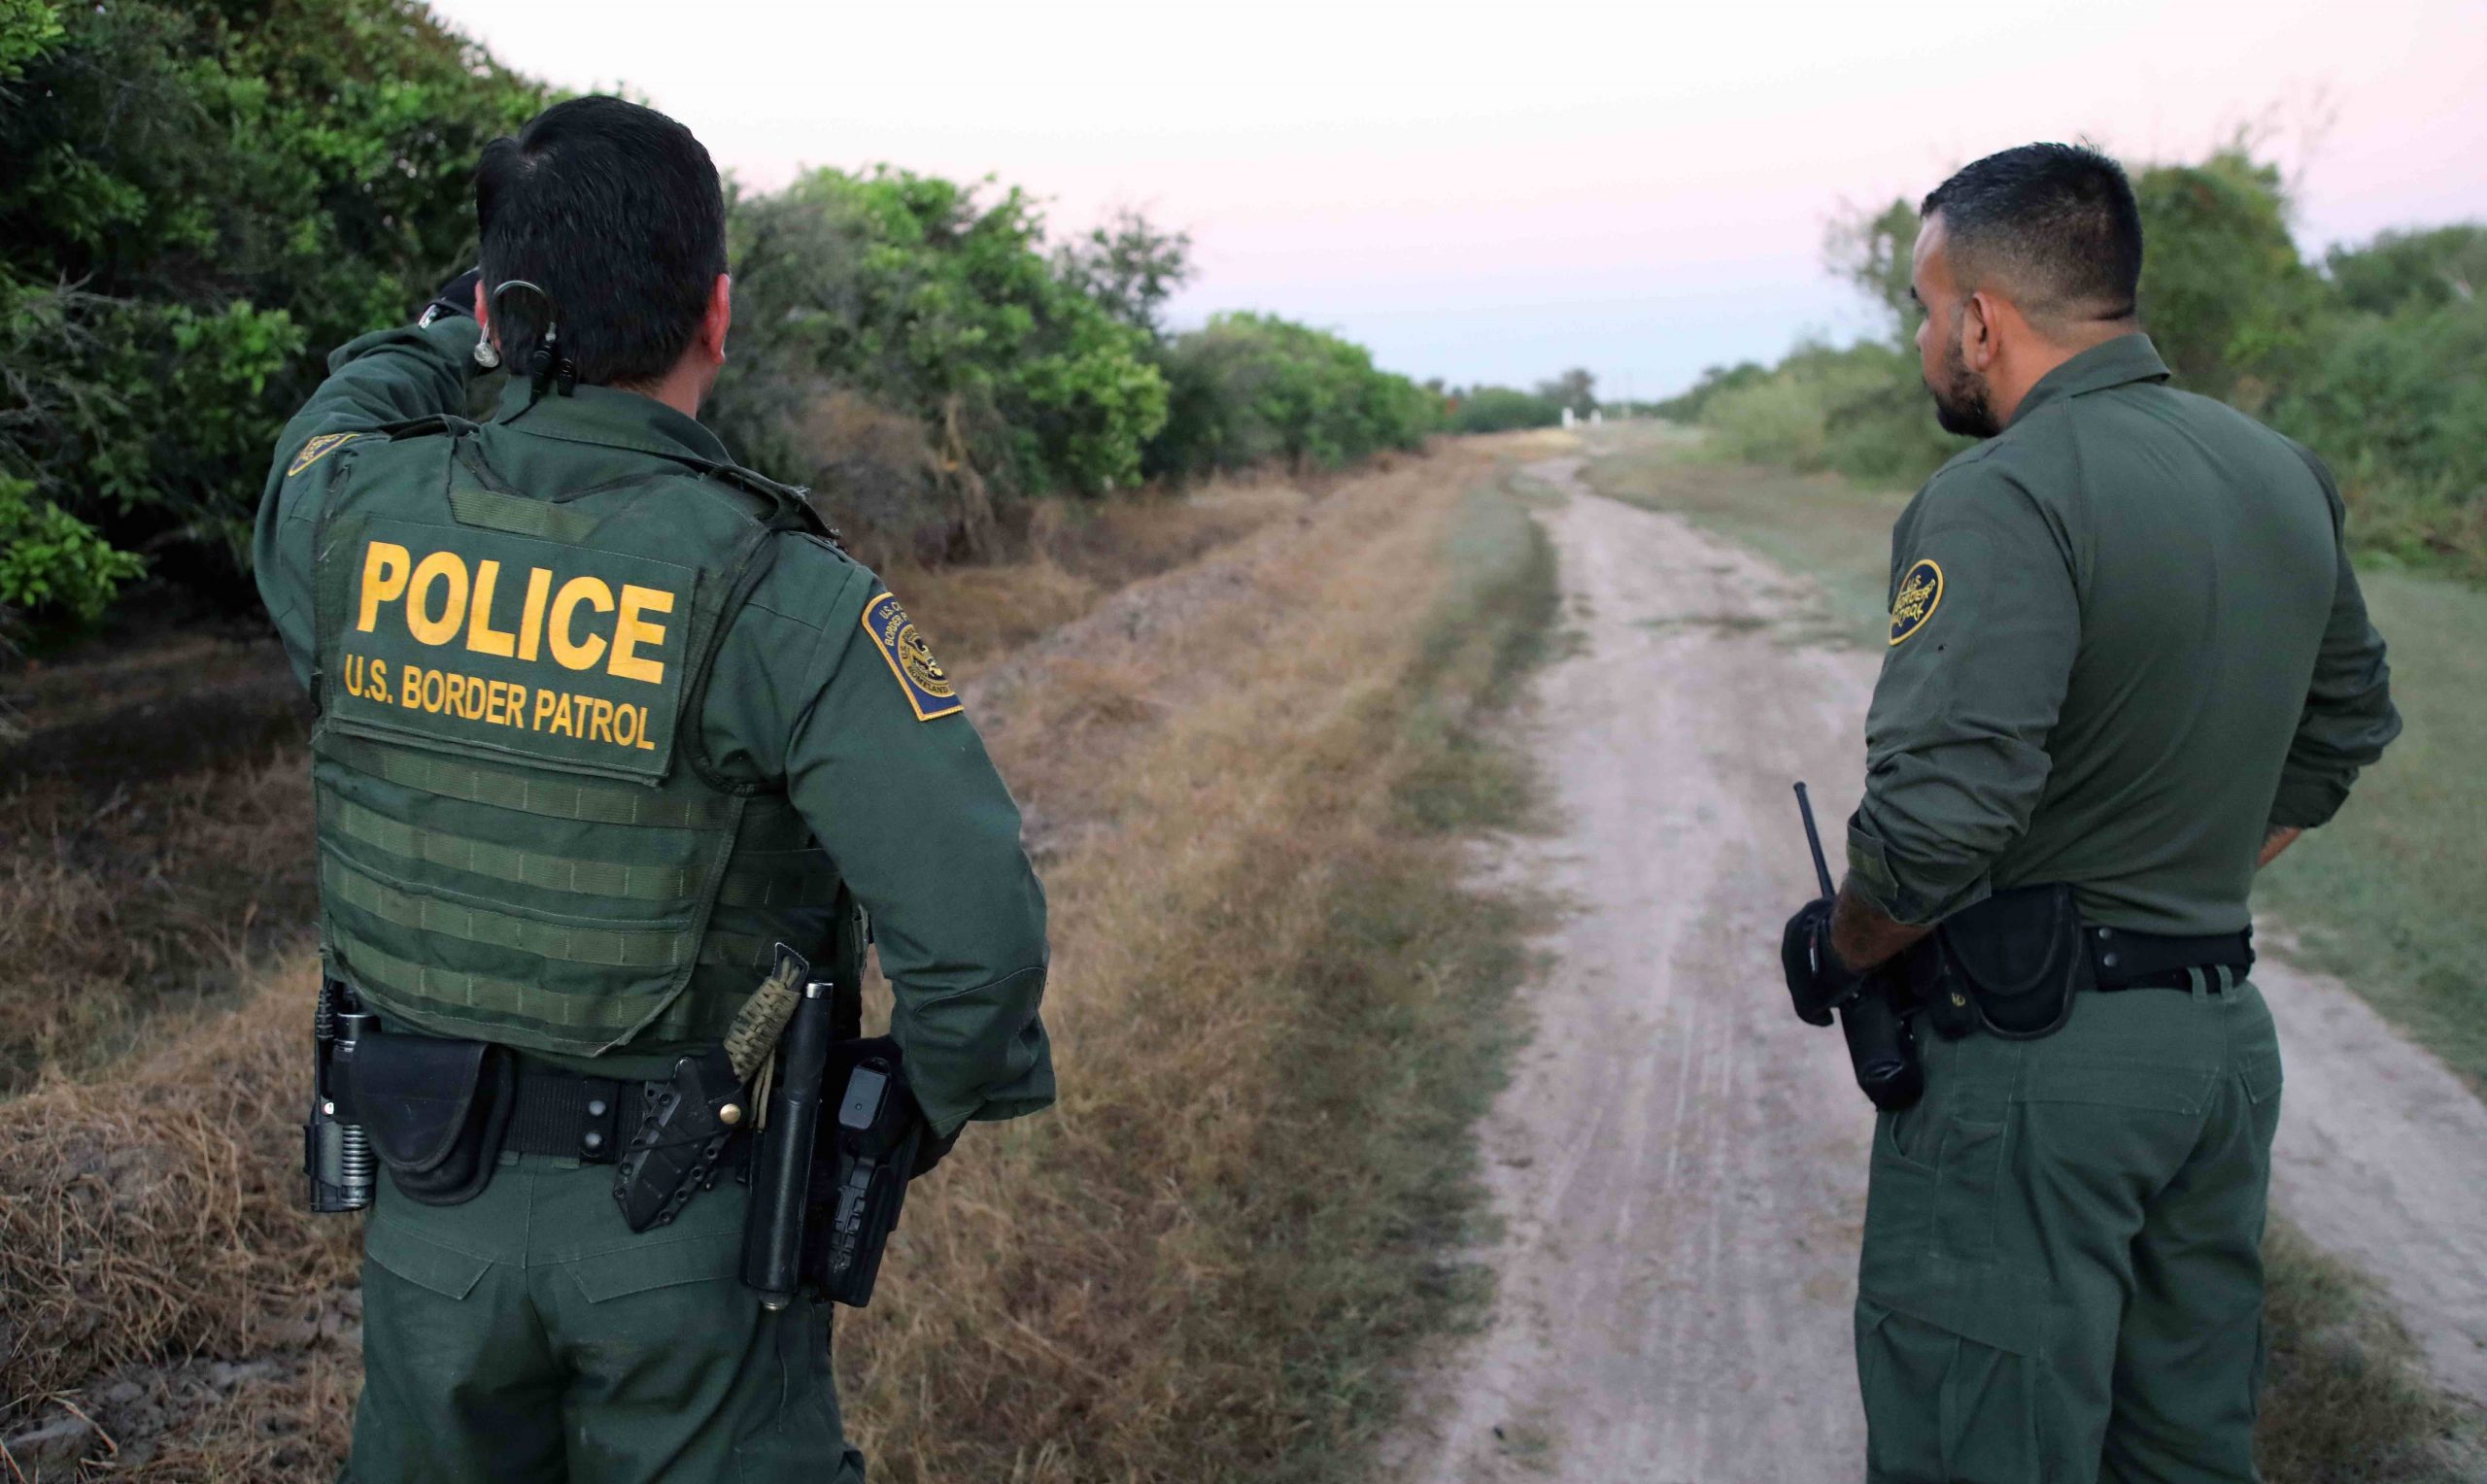 two men wearing border parol uniforms stand along dirt road with back to the camera. one points into the distance.